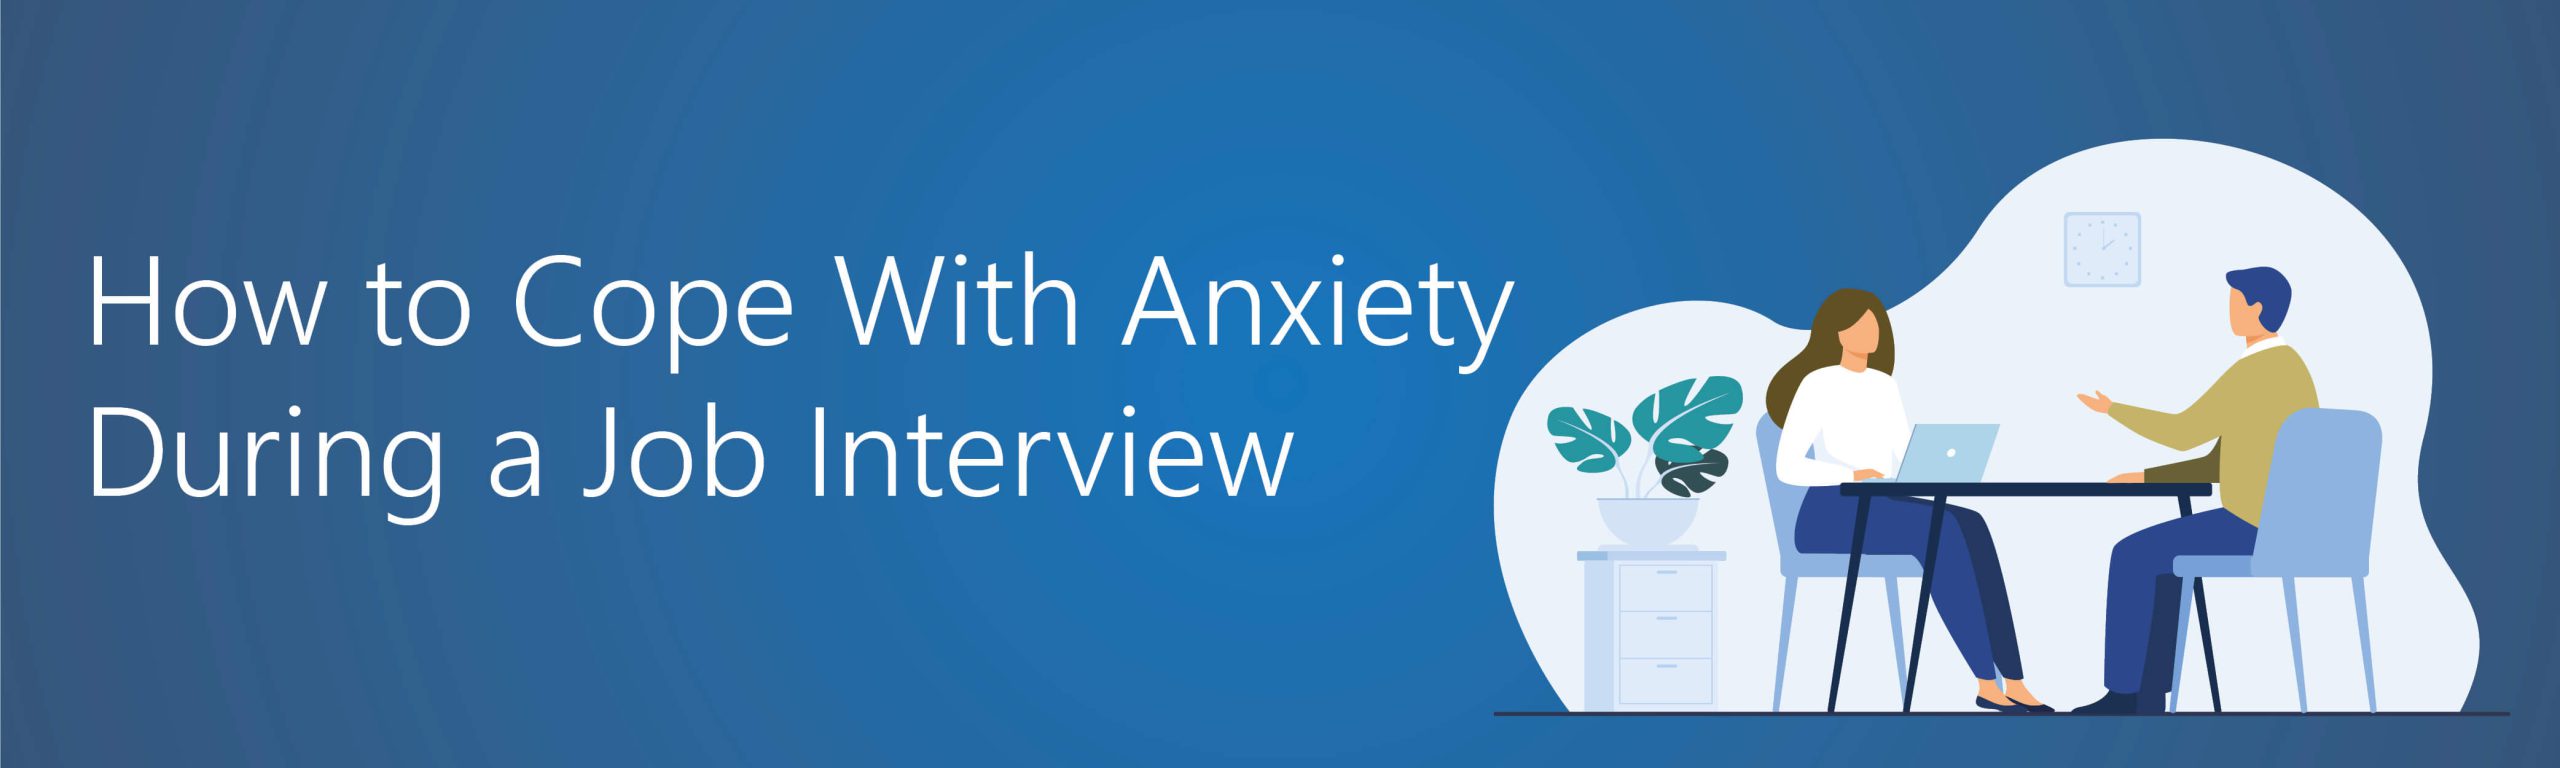 Anxiety During Interview Tips Banner